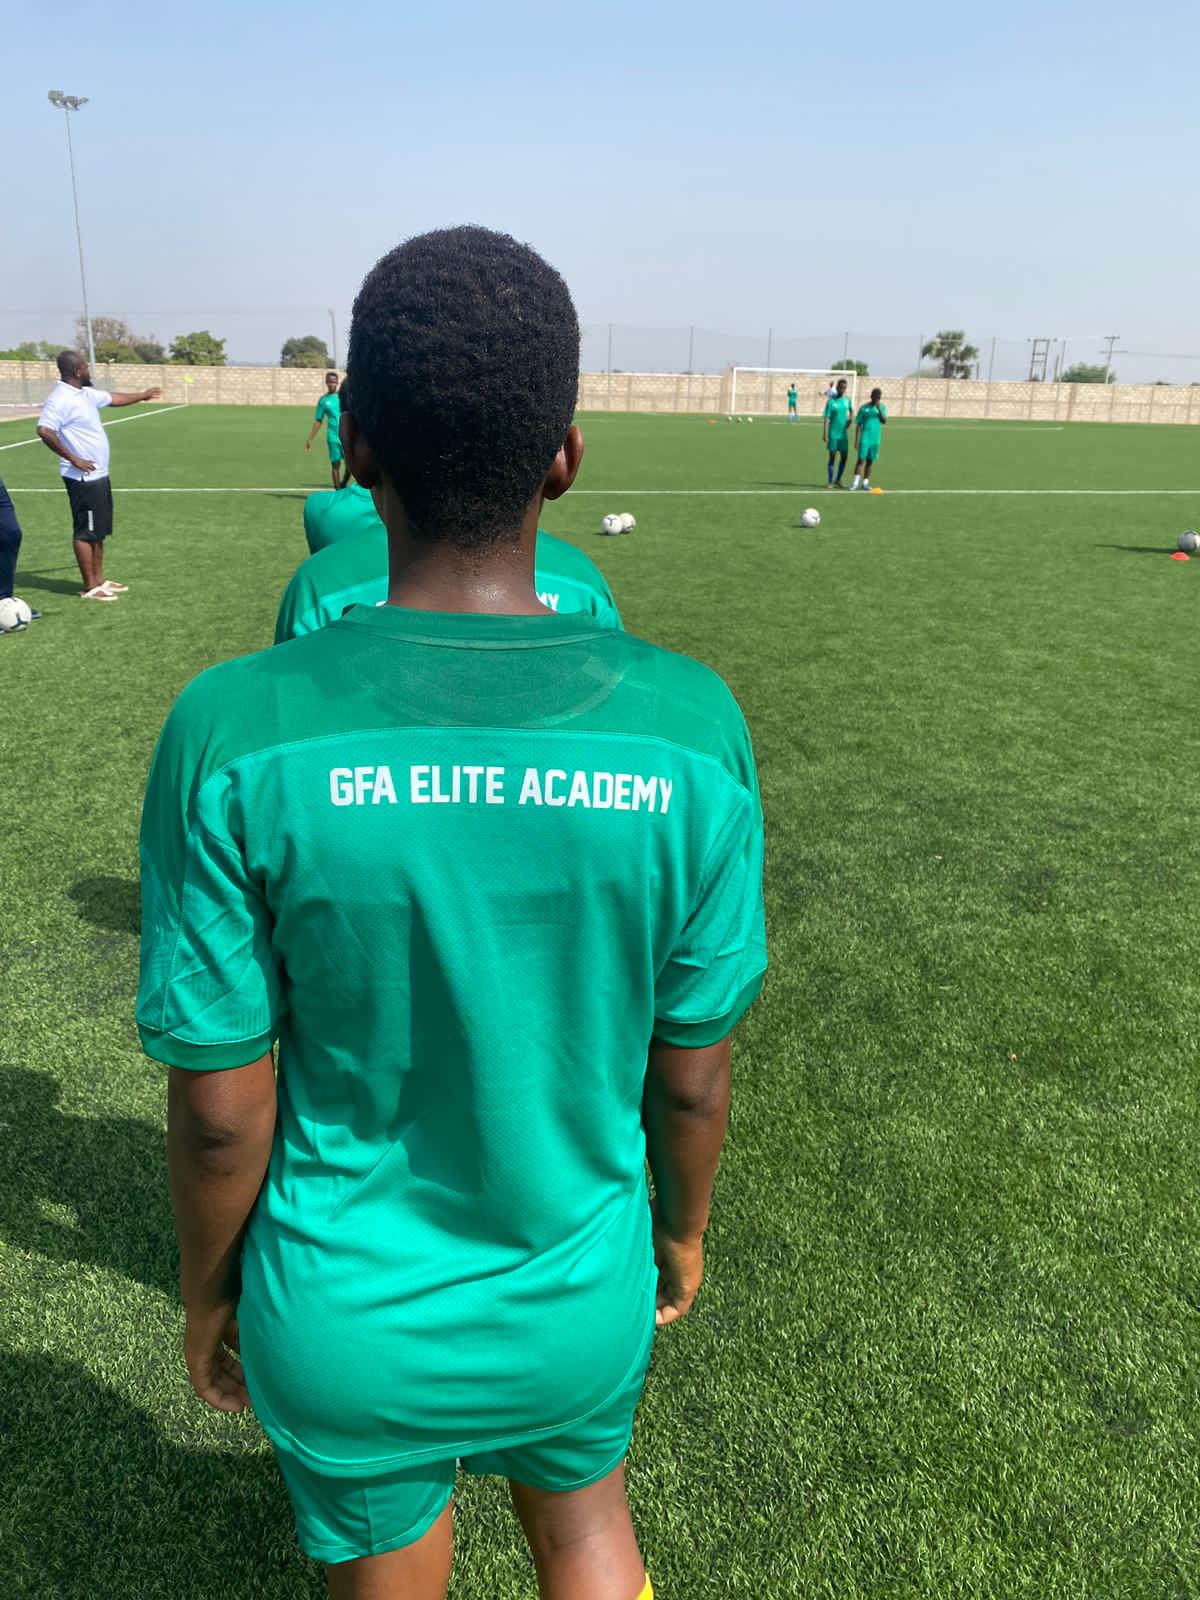 Kumasi, Accra to benefit from GFA Elite Football Academy system